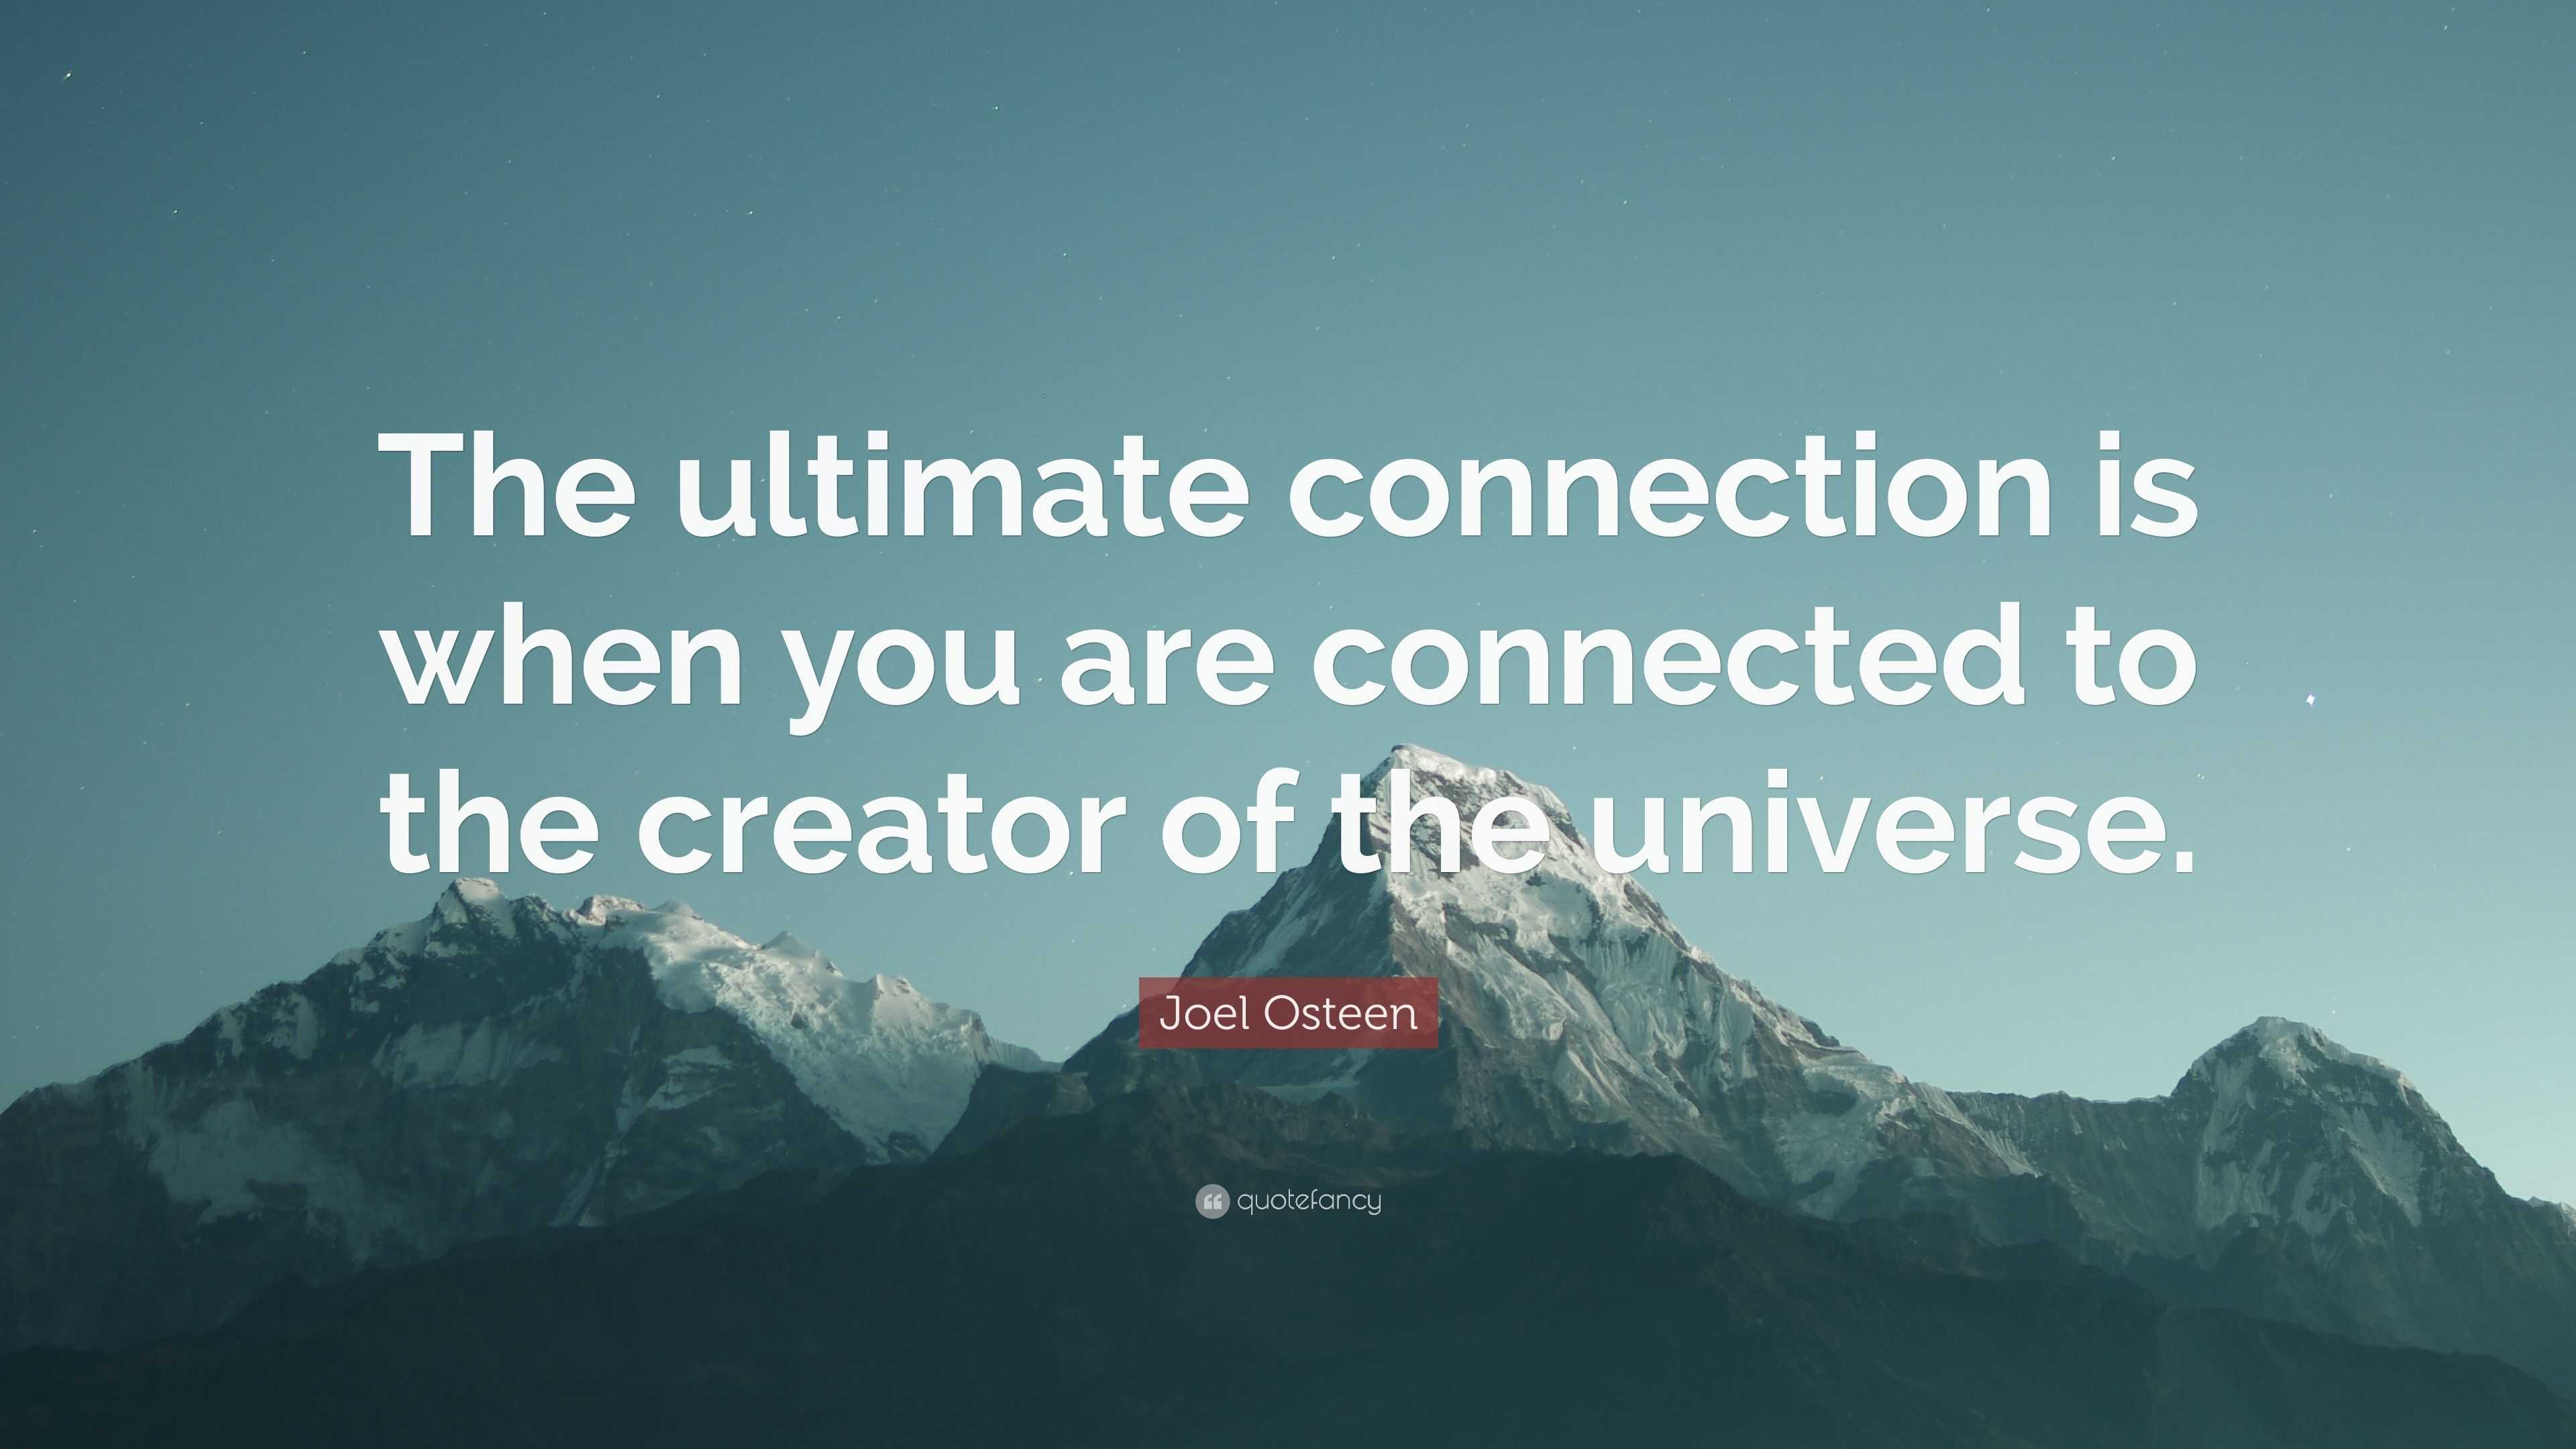 Joel Osteen Quote: “The ultimate connection is when you are connected to the  creator of the